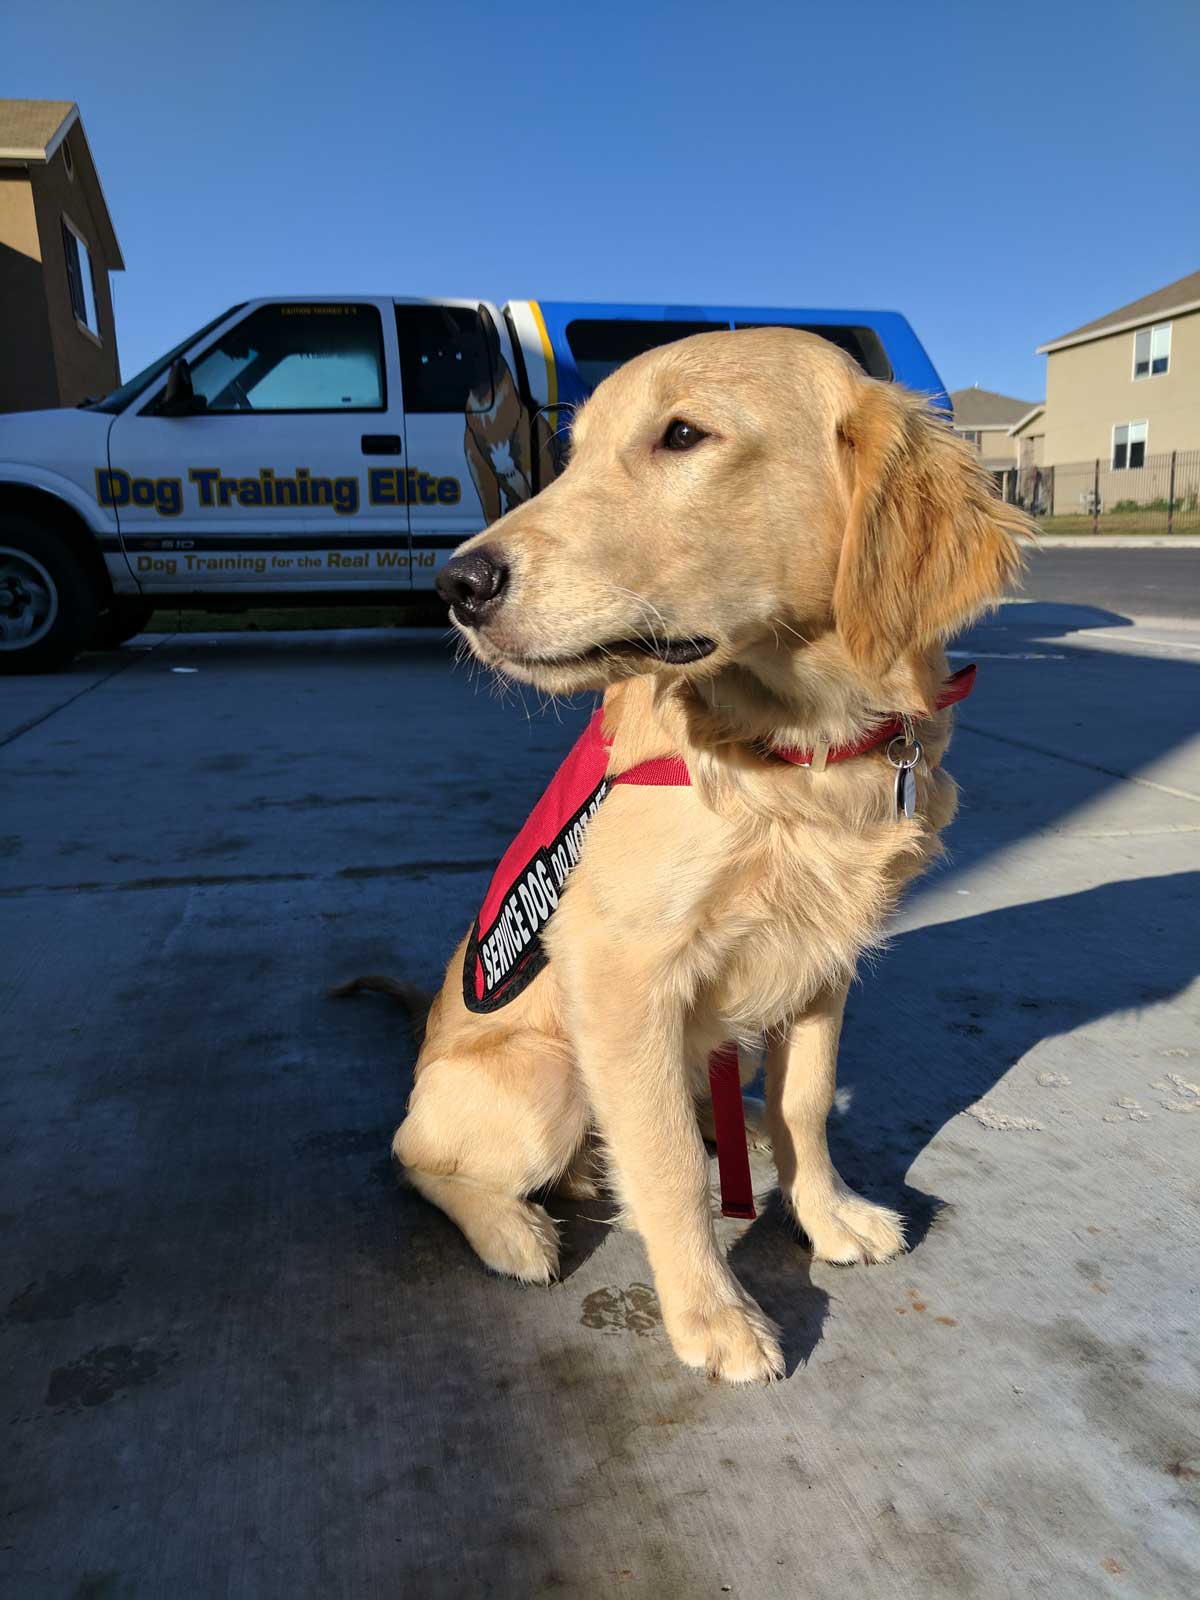 Dog Training Elite Salt Lake City is proud to have the highest rated service dog training programs near you in Salt Lake City.